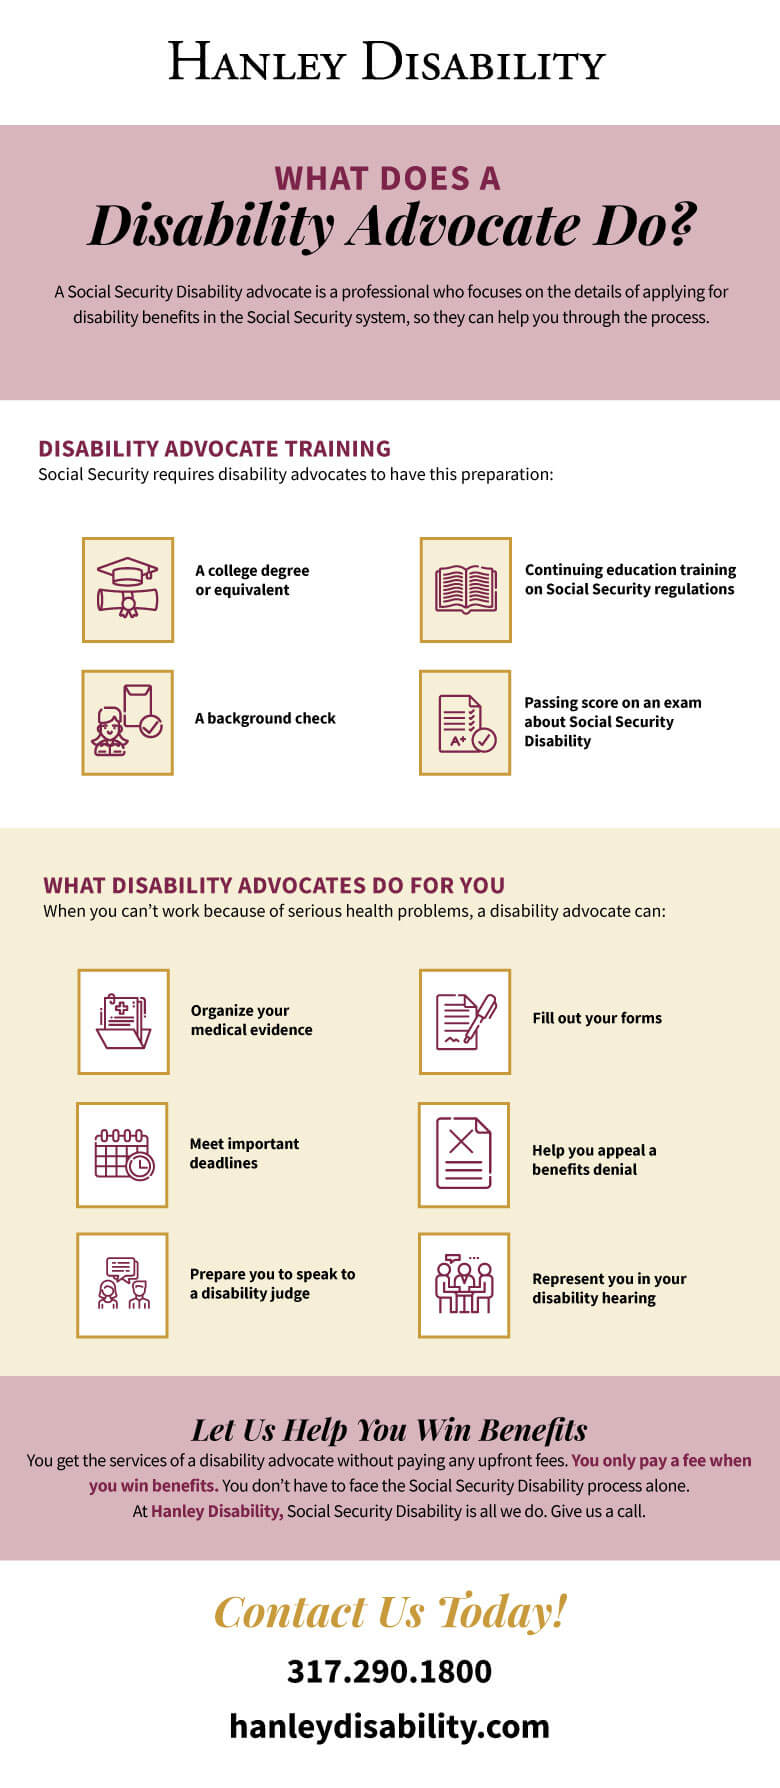 An infographic answering the question "What Does A Disability Advocate Do?"